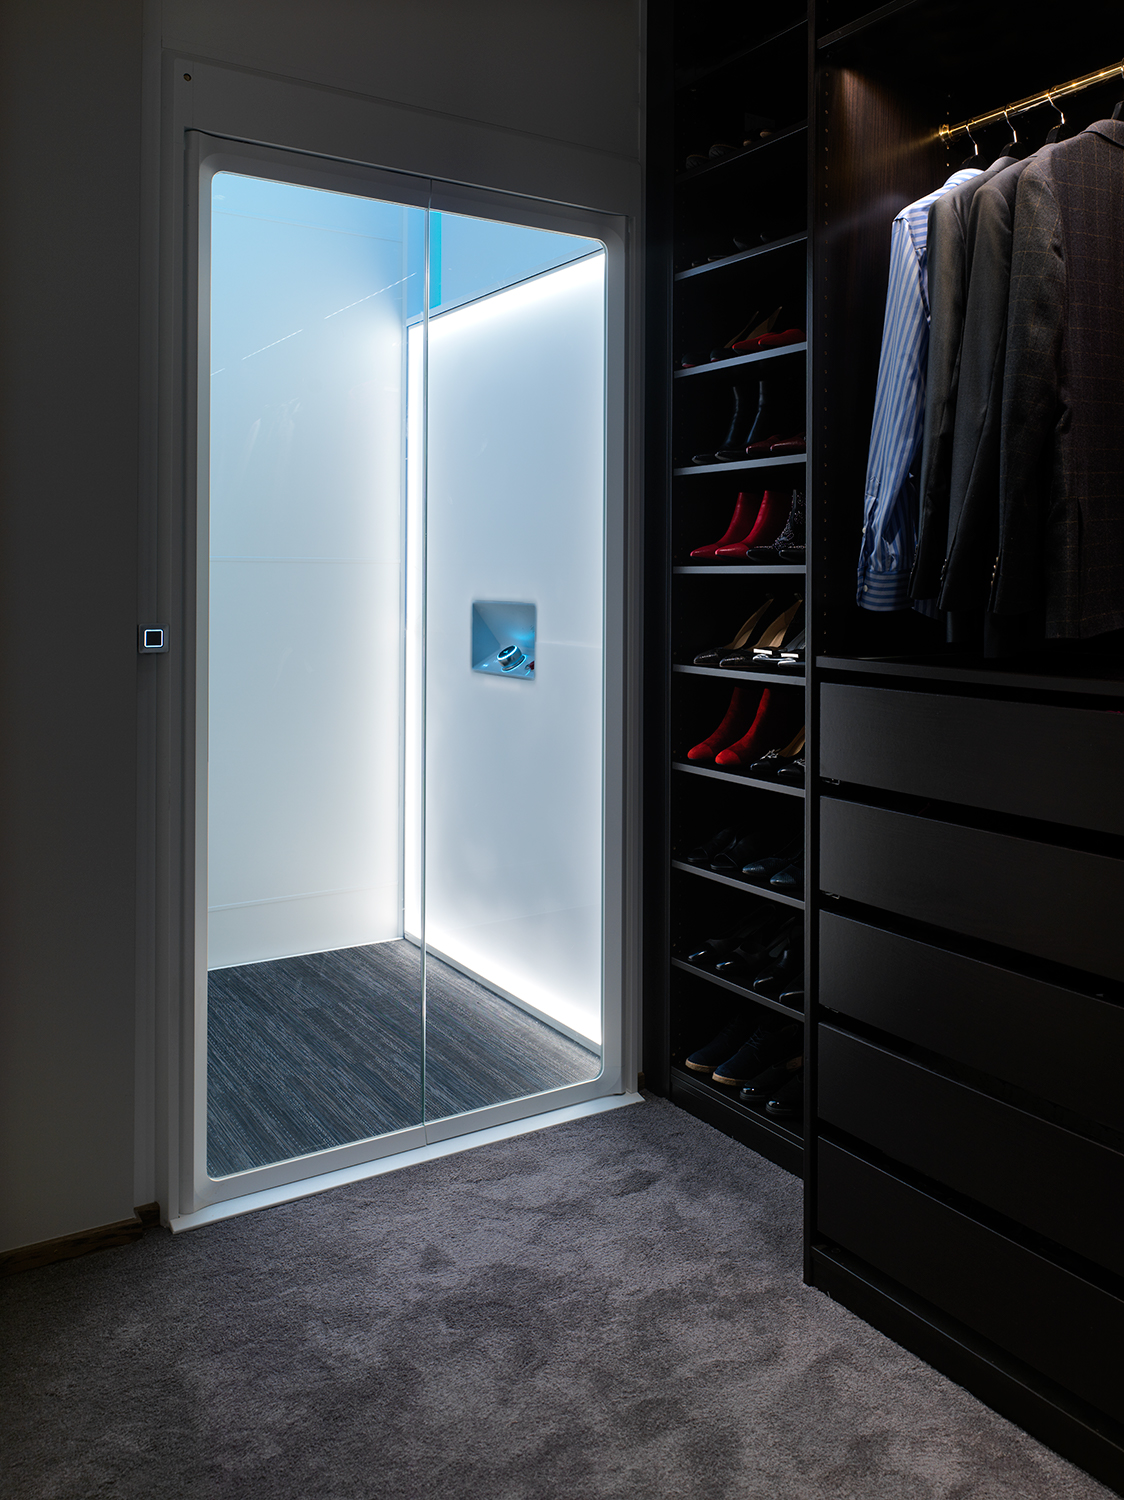 Aritco Homelift stopping by the walking closet in a home